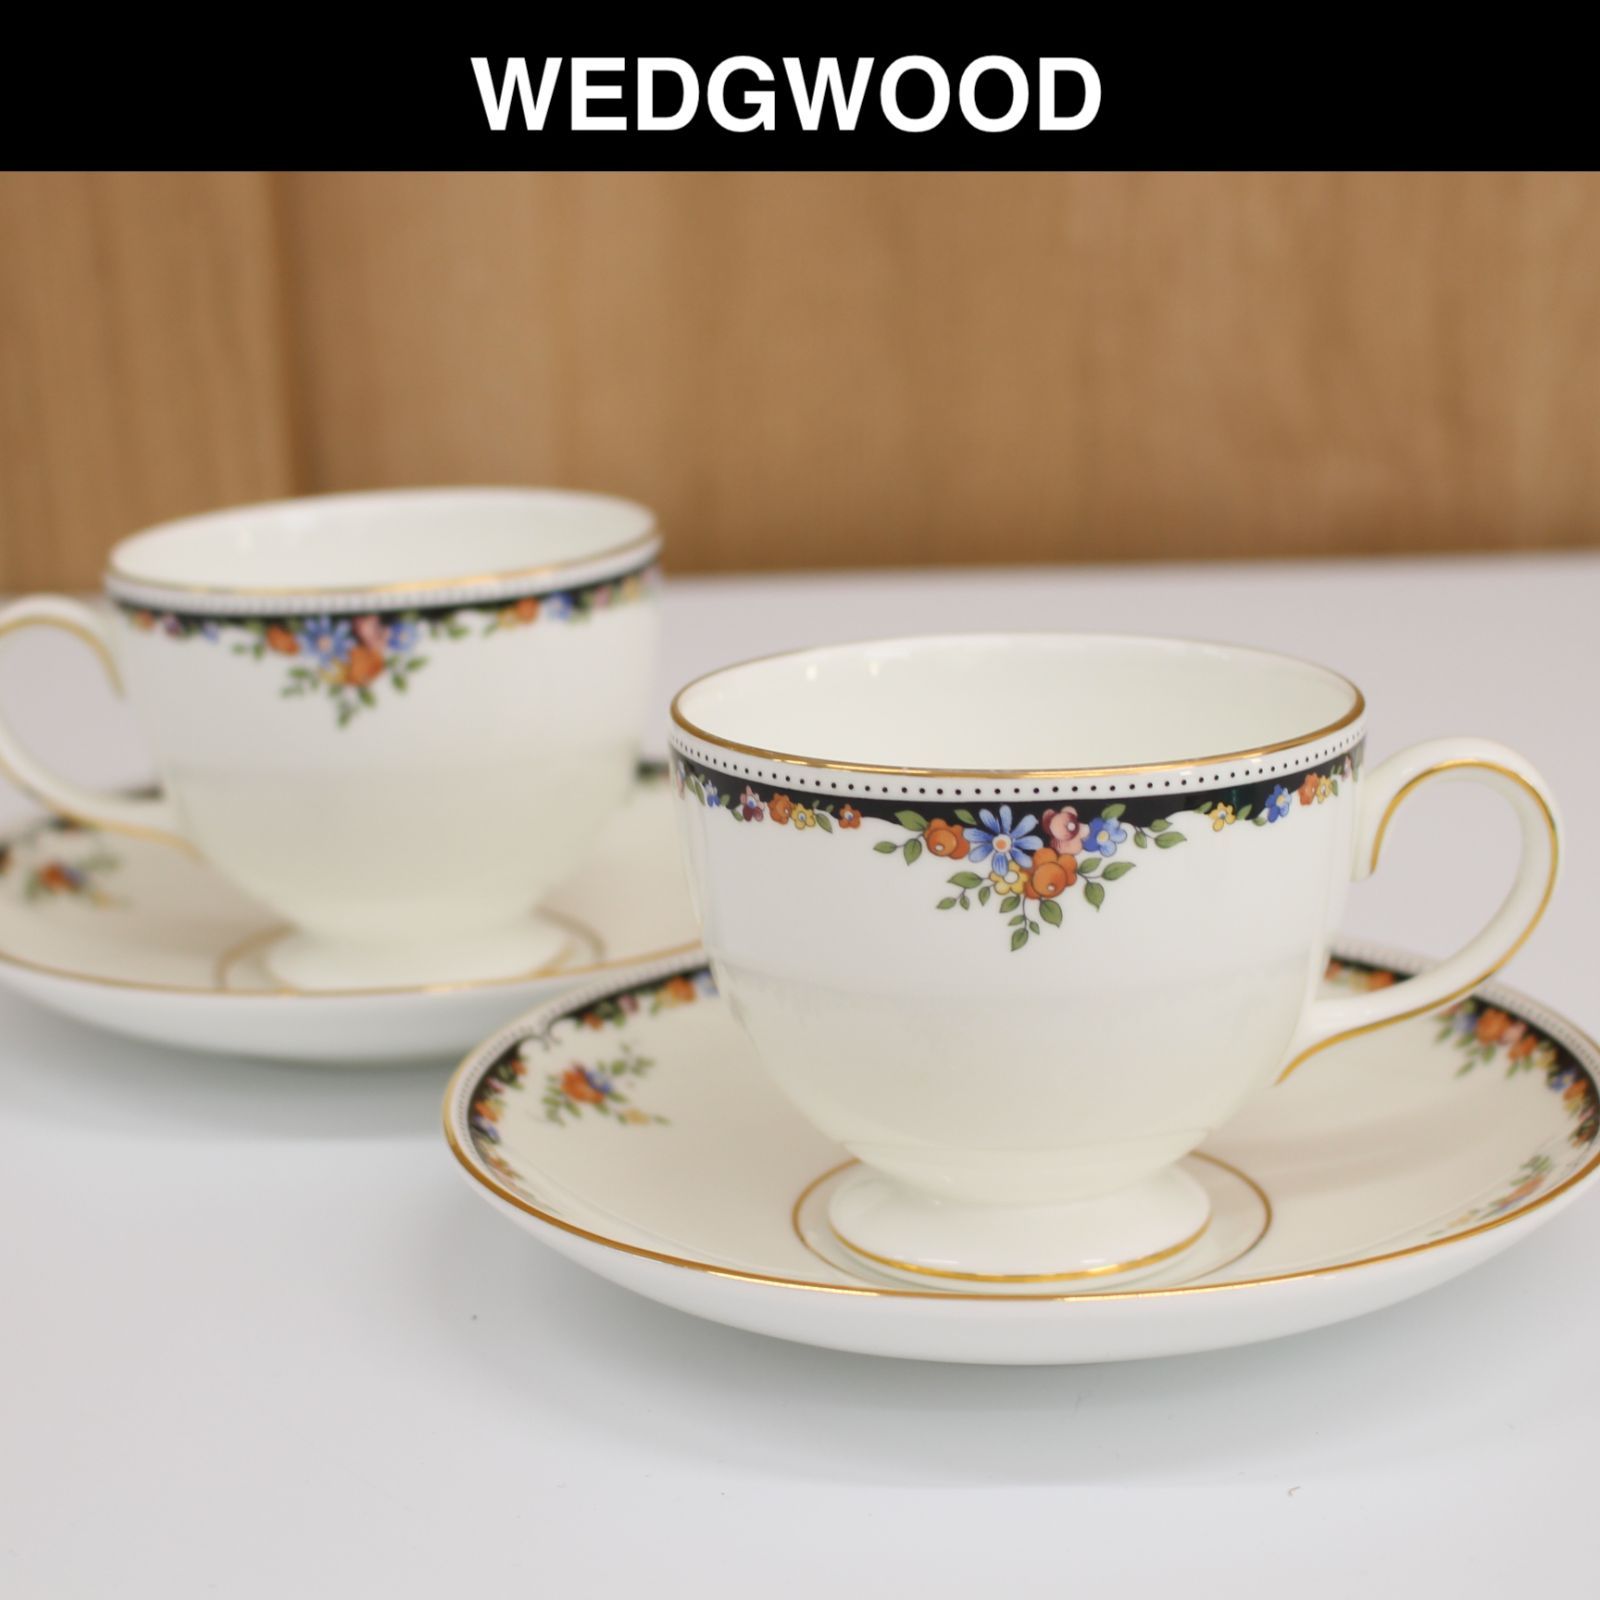 A888】WEDGWOOD オズボーン カップ&ソーサー 廃盤品 2客セット